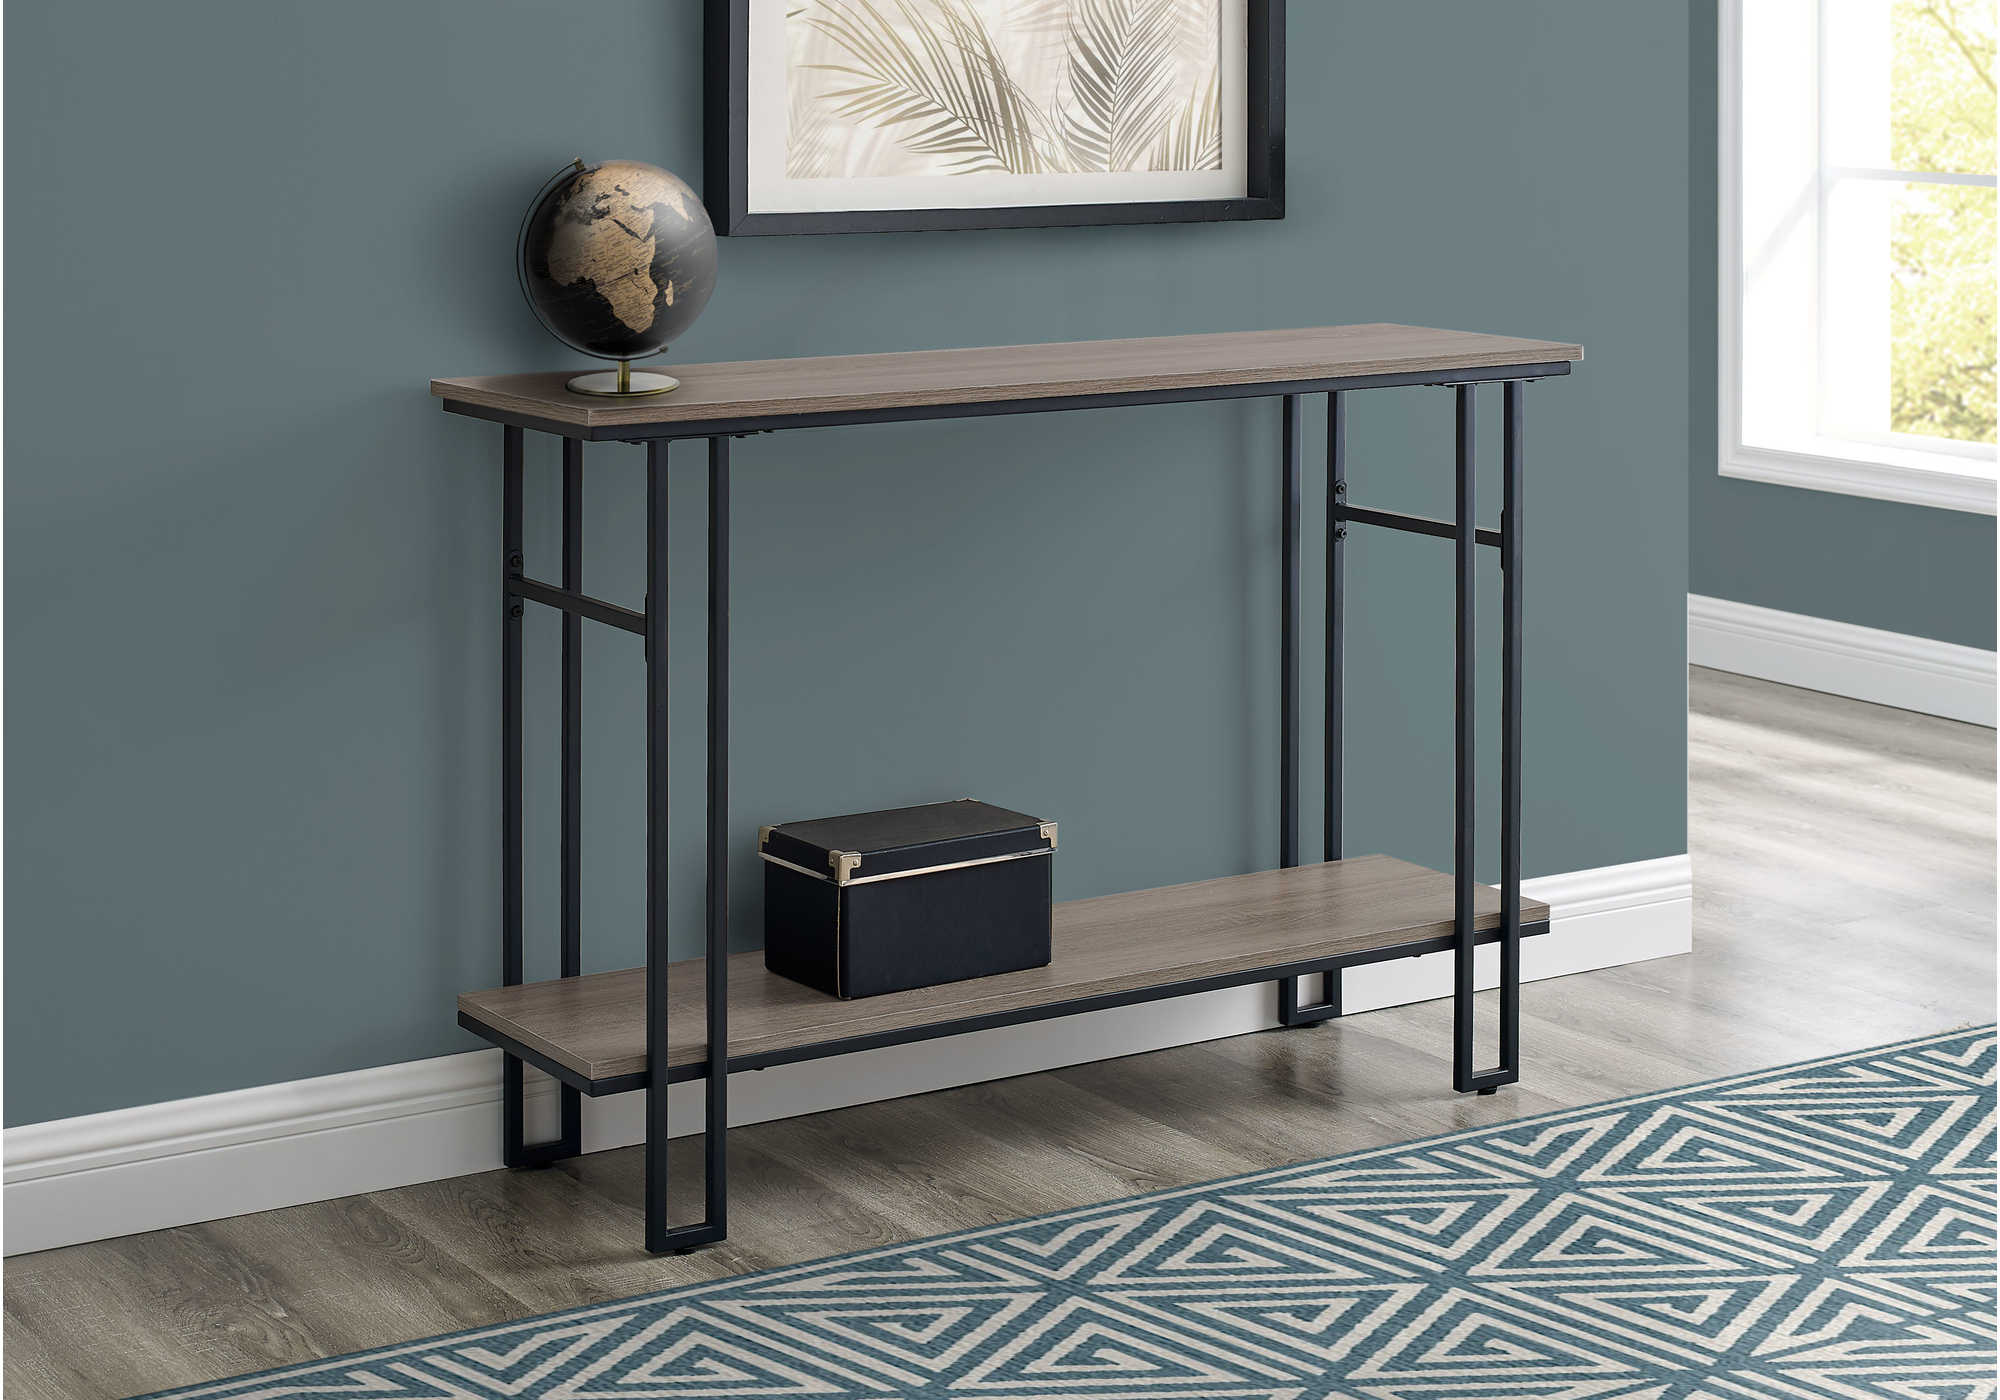 BEDROOM ACCENT CONSOLE TABLE - 48"L / TAUPE / BLACK METAL HALL CONSOLE